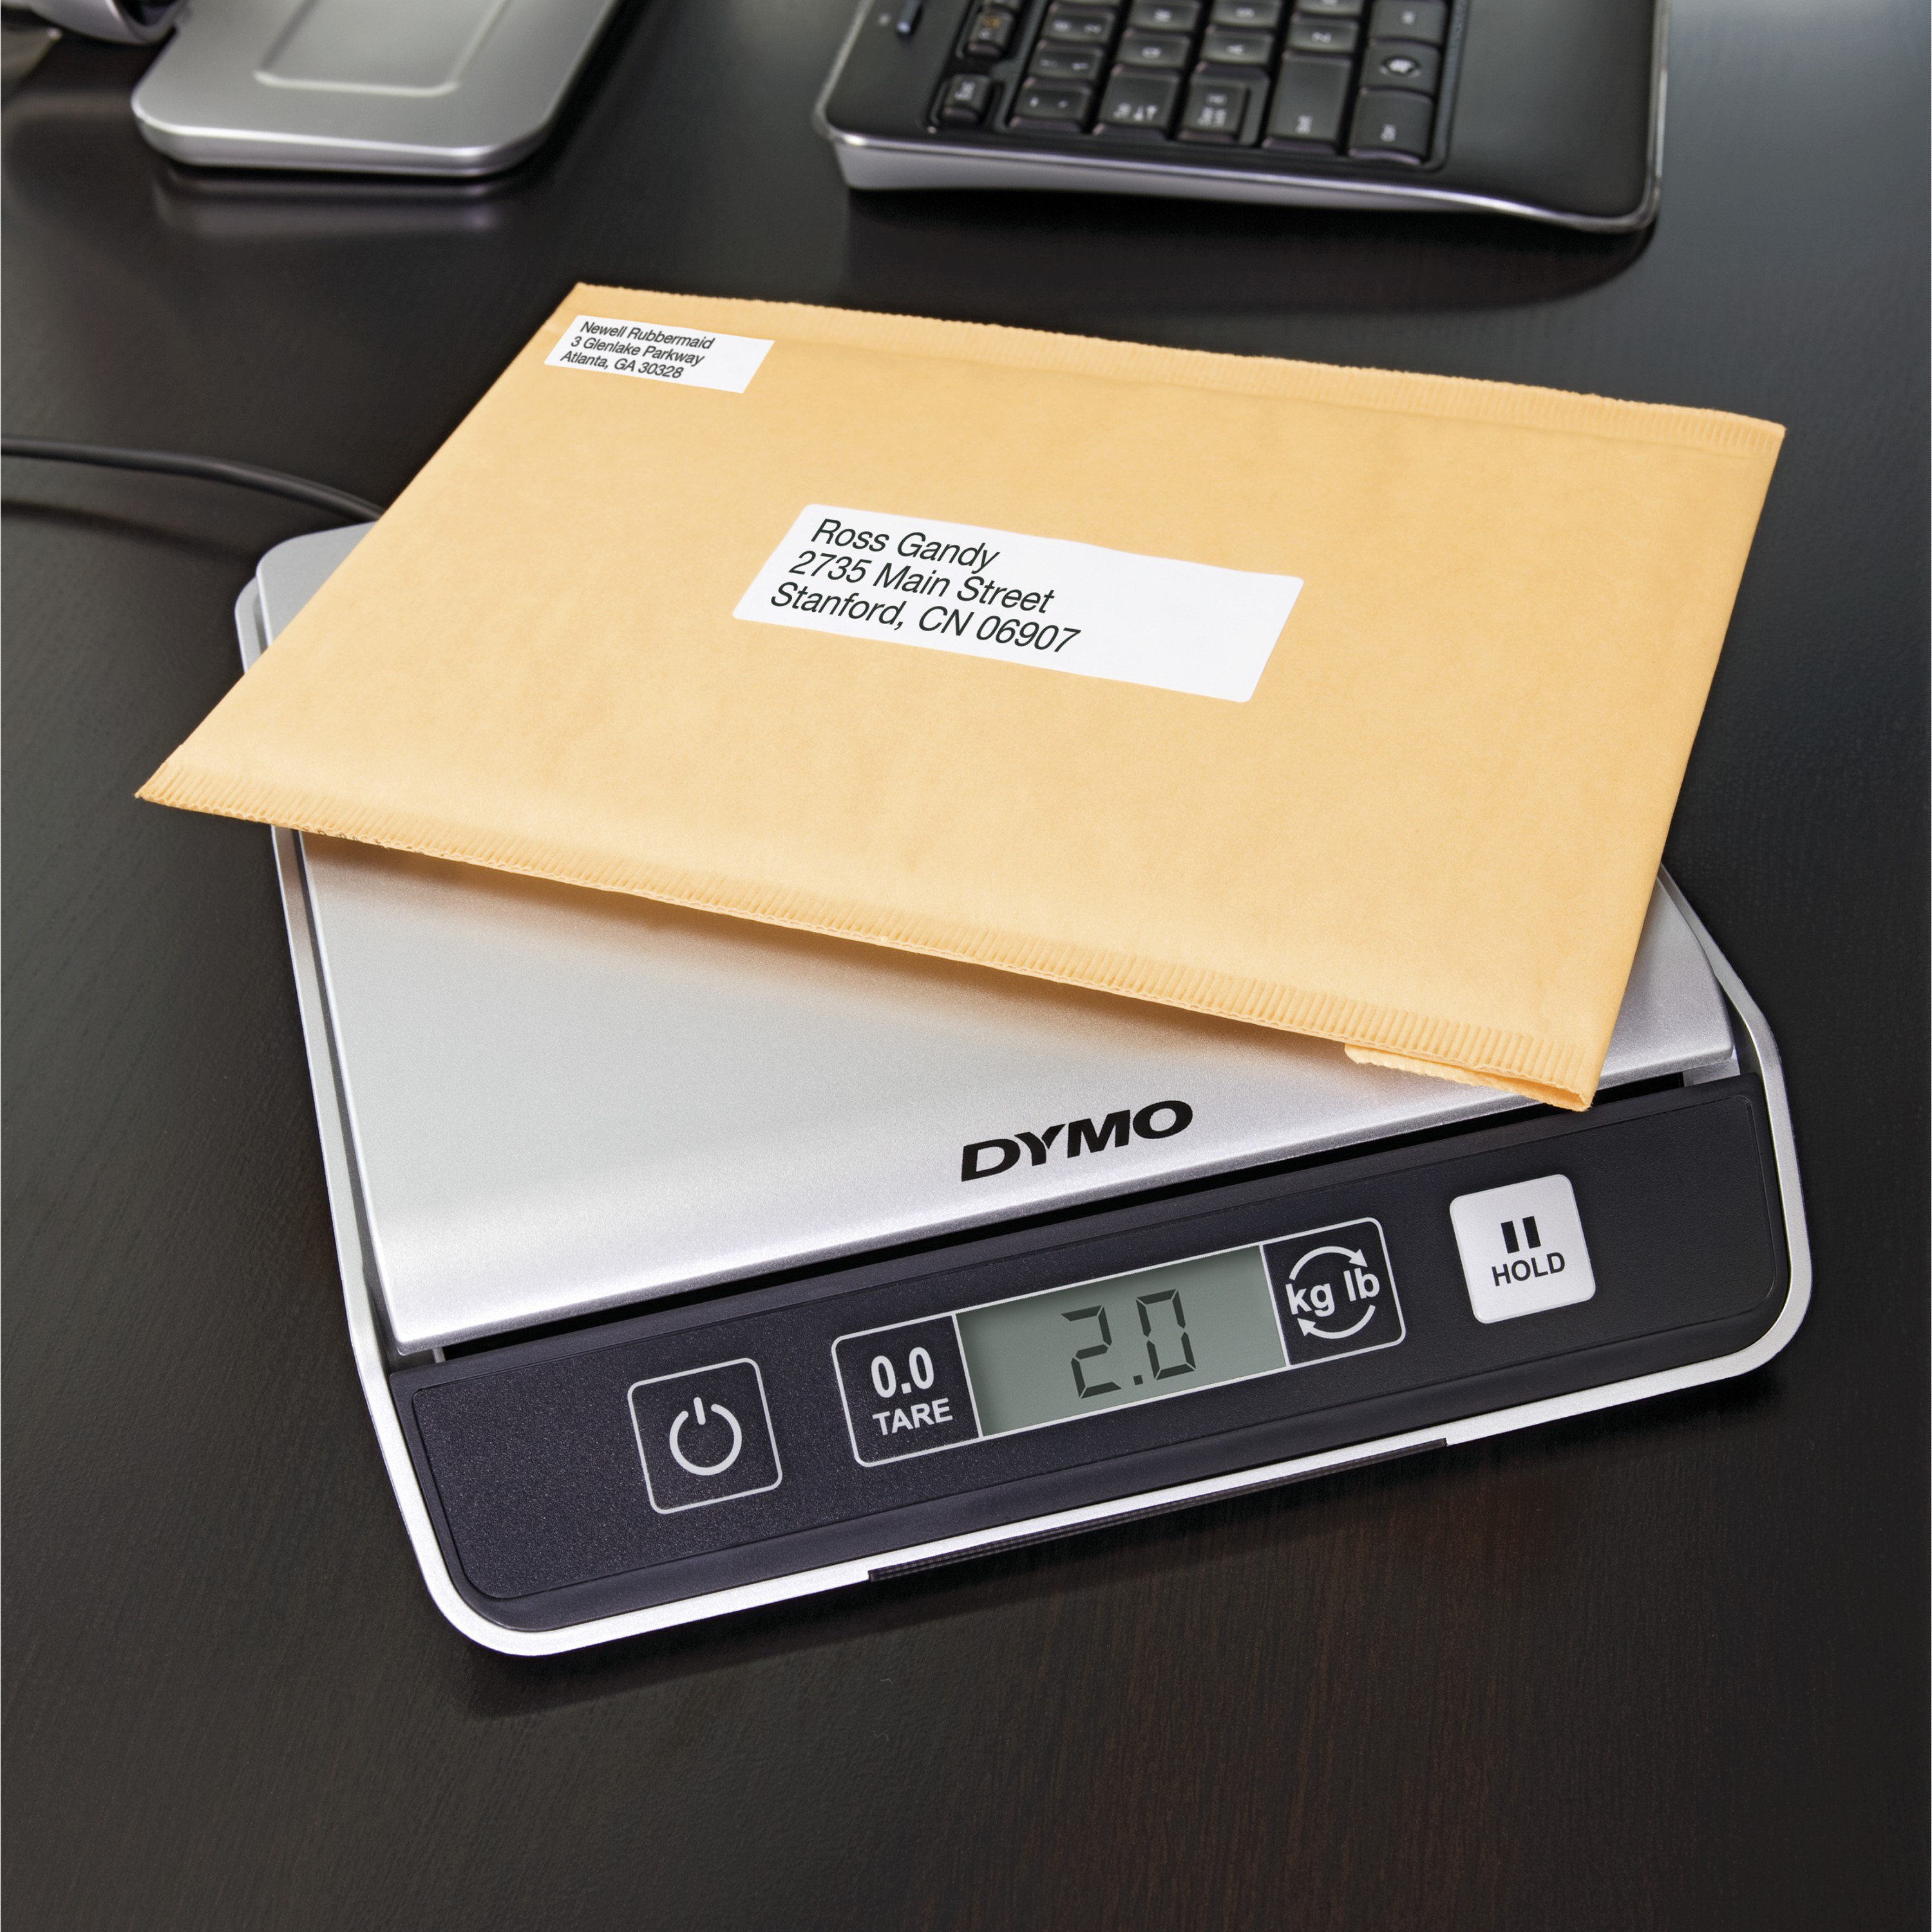 Dymo M25 Digital Postal Weighing Scale Letters & Packages up to 25 lbs NIB